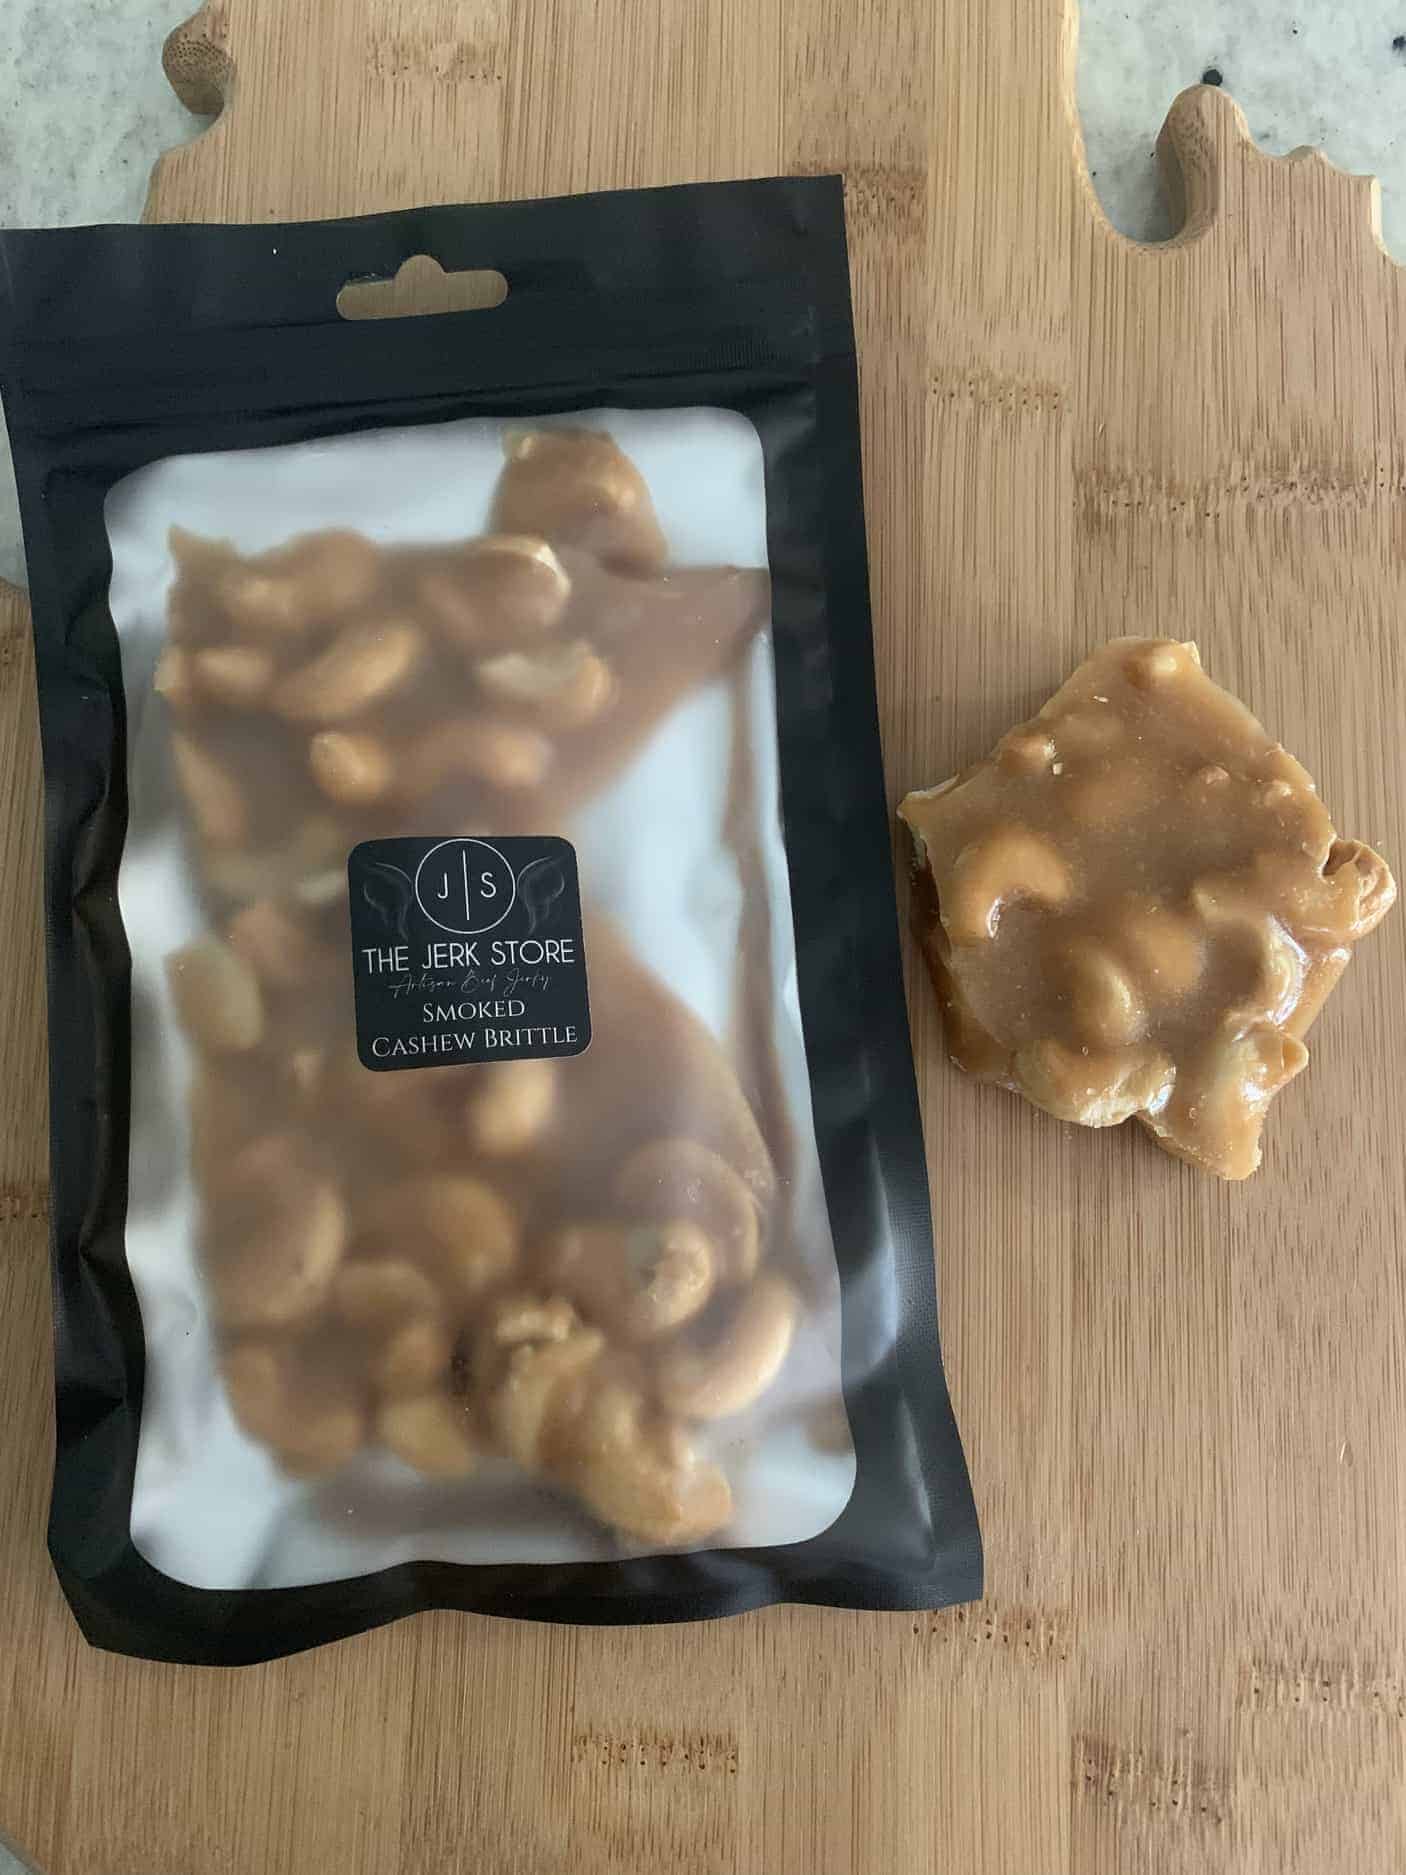 This Smoked Cashew Brittle is made with love by The Jerk Store! Shop more unique gift ideas today with Spots Initiatives, the best way to support creators.